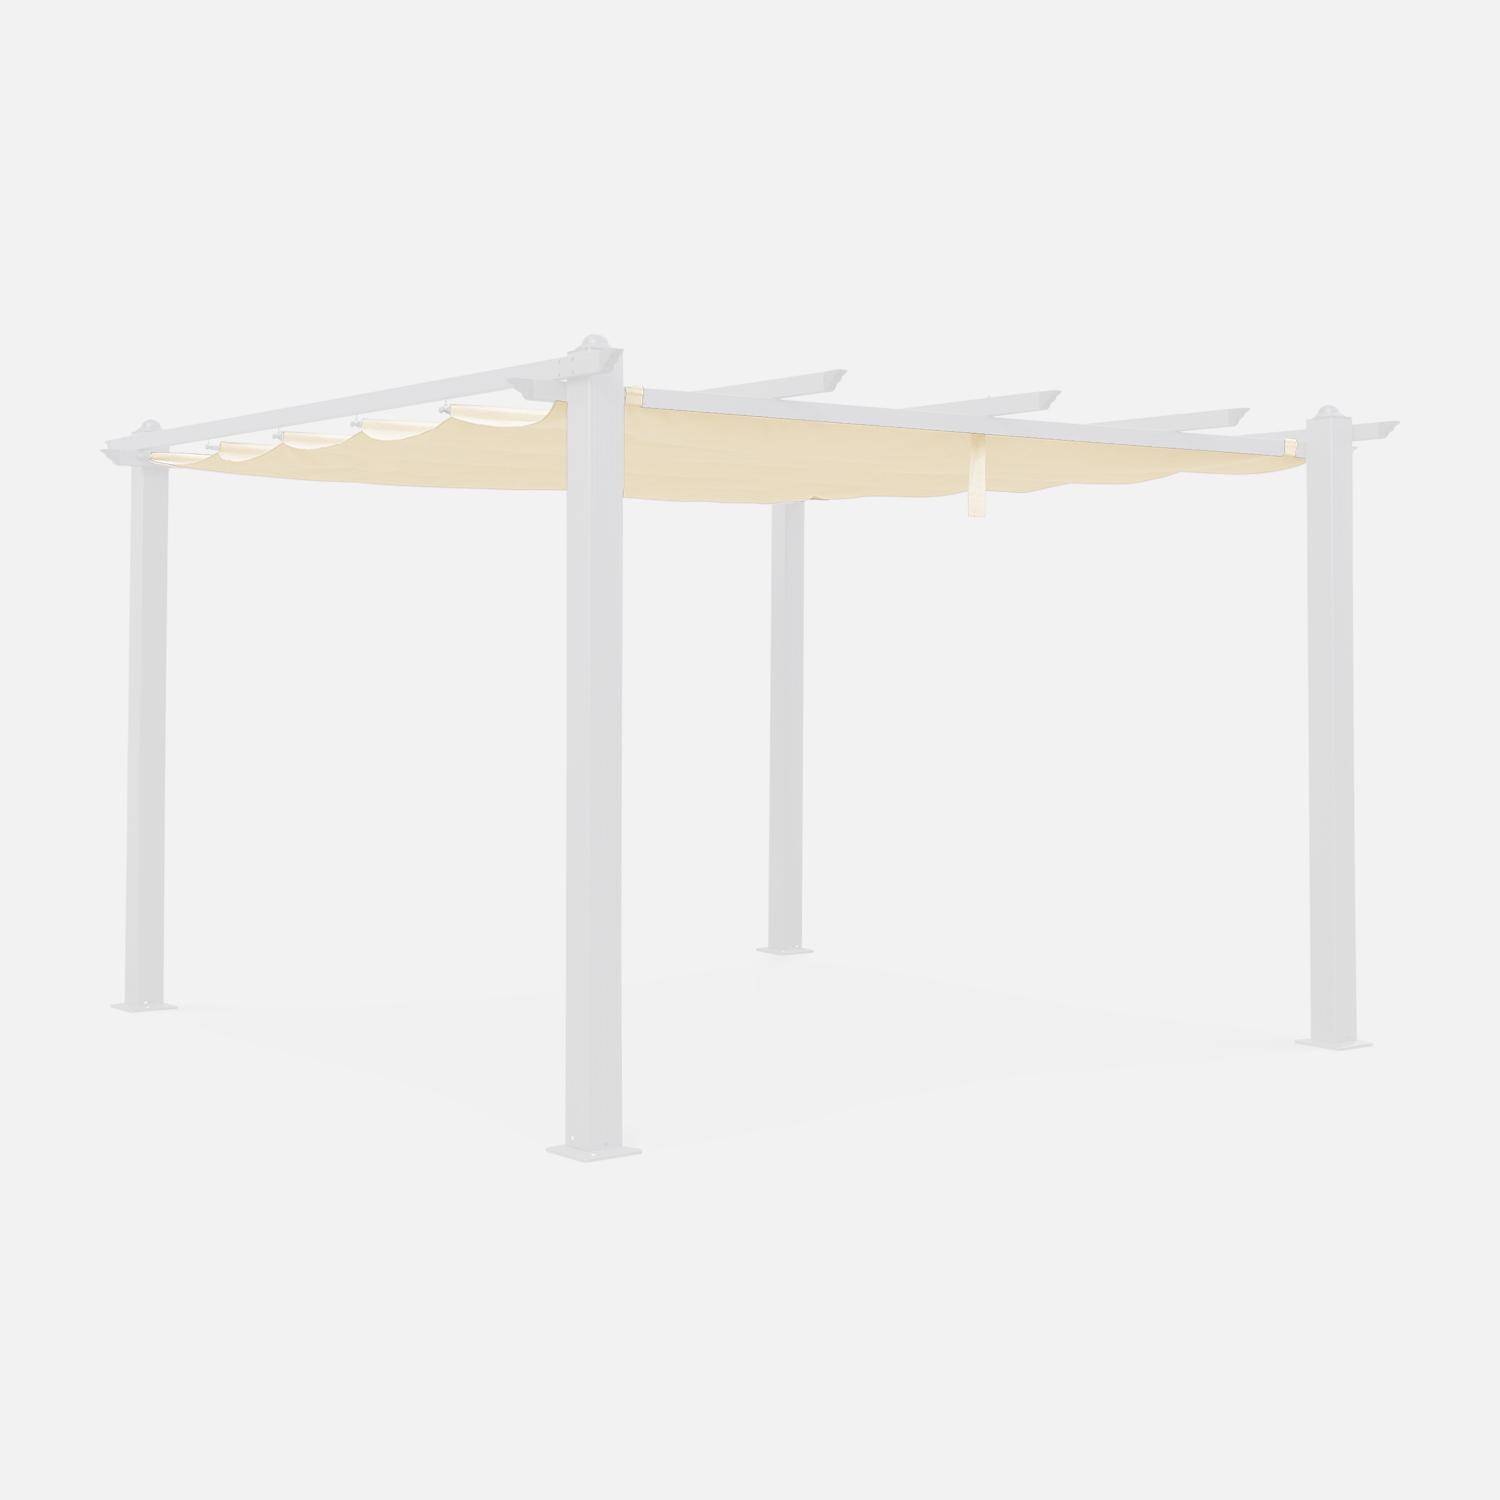 Canopy roof for 3x4m Condate gazebo - pergola replacement canopy - Off-White Photo1